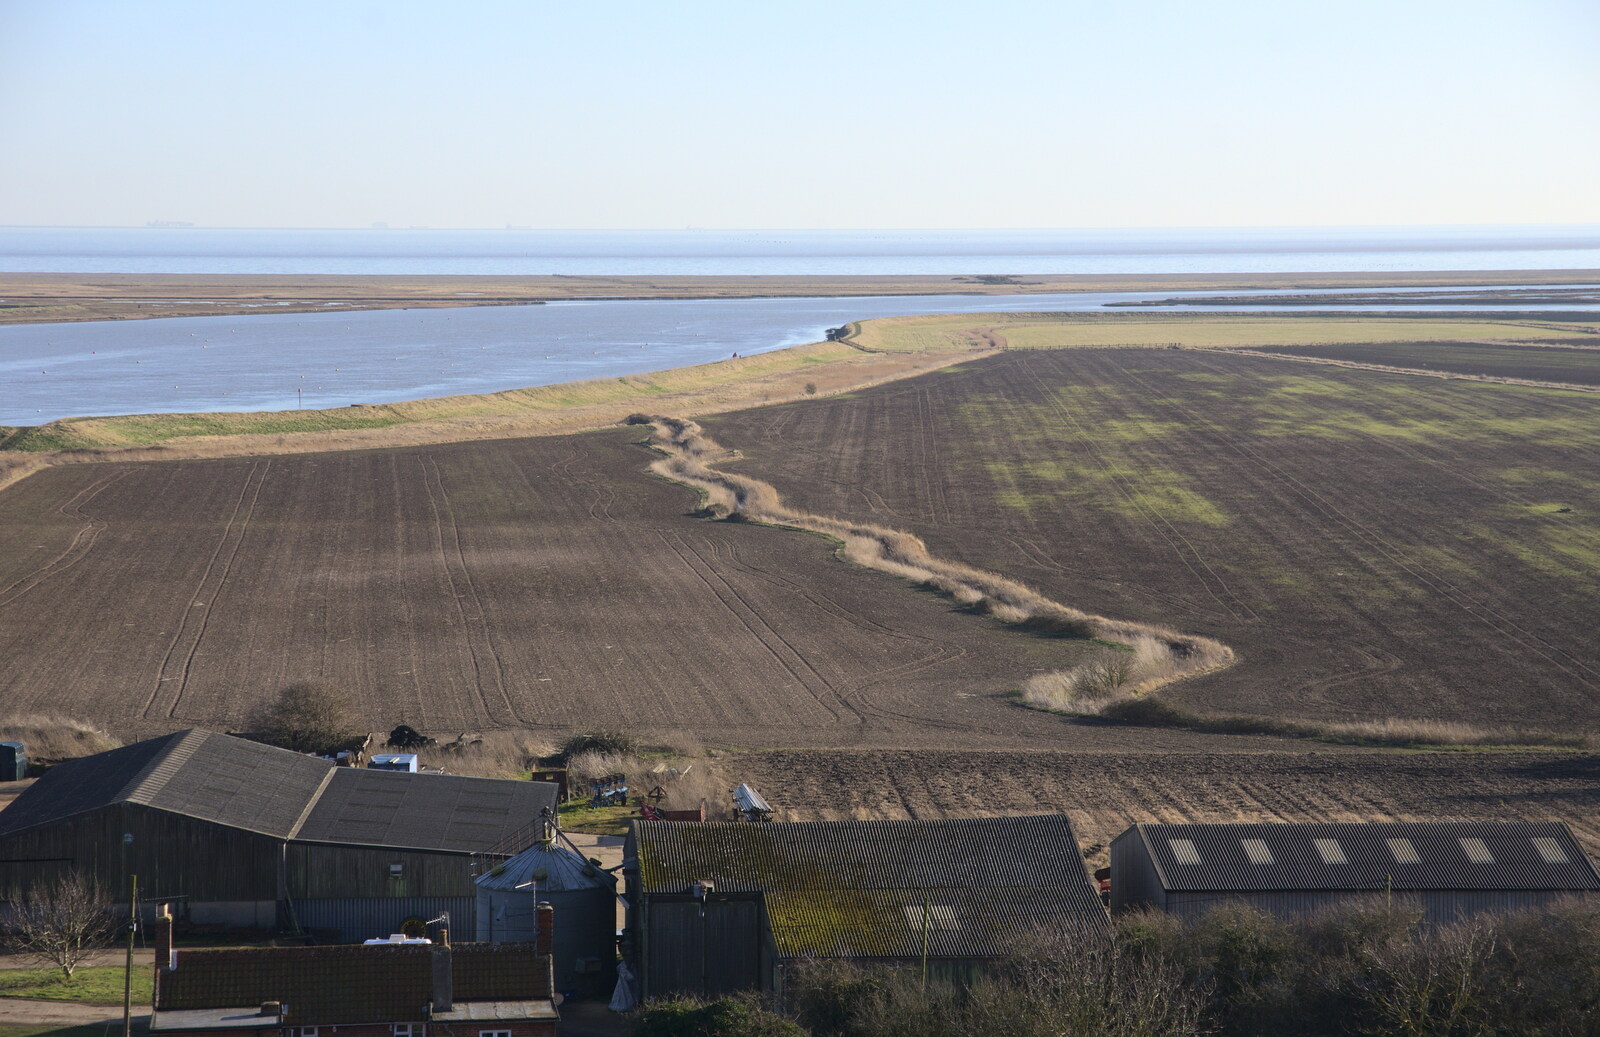 A view over Orford Ness from An Orford Day Out, Orford, Suffolk - 17th February 2018